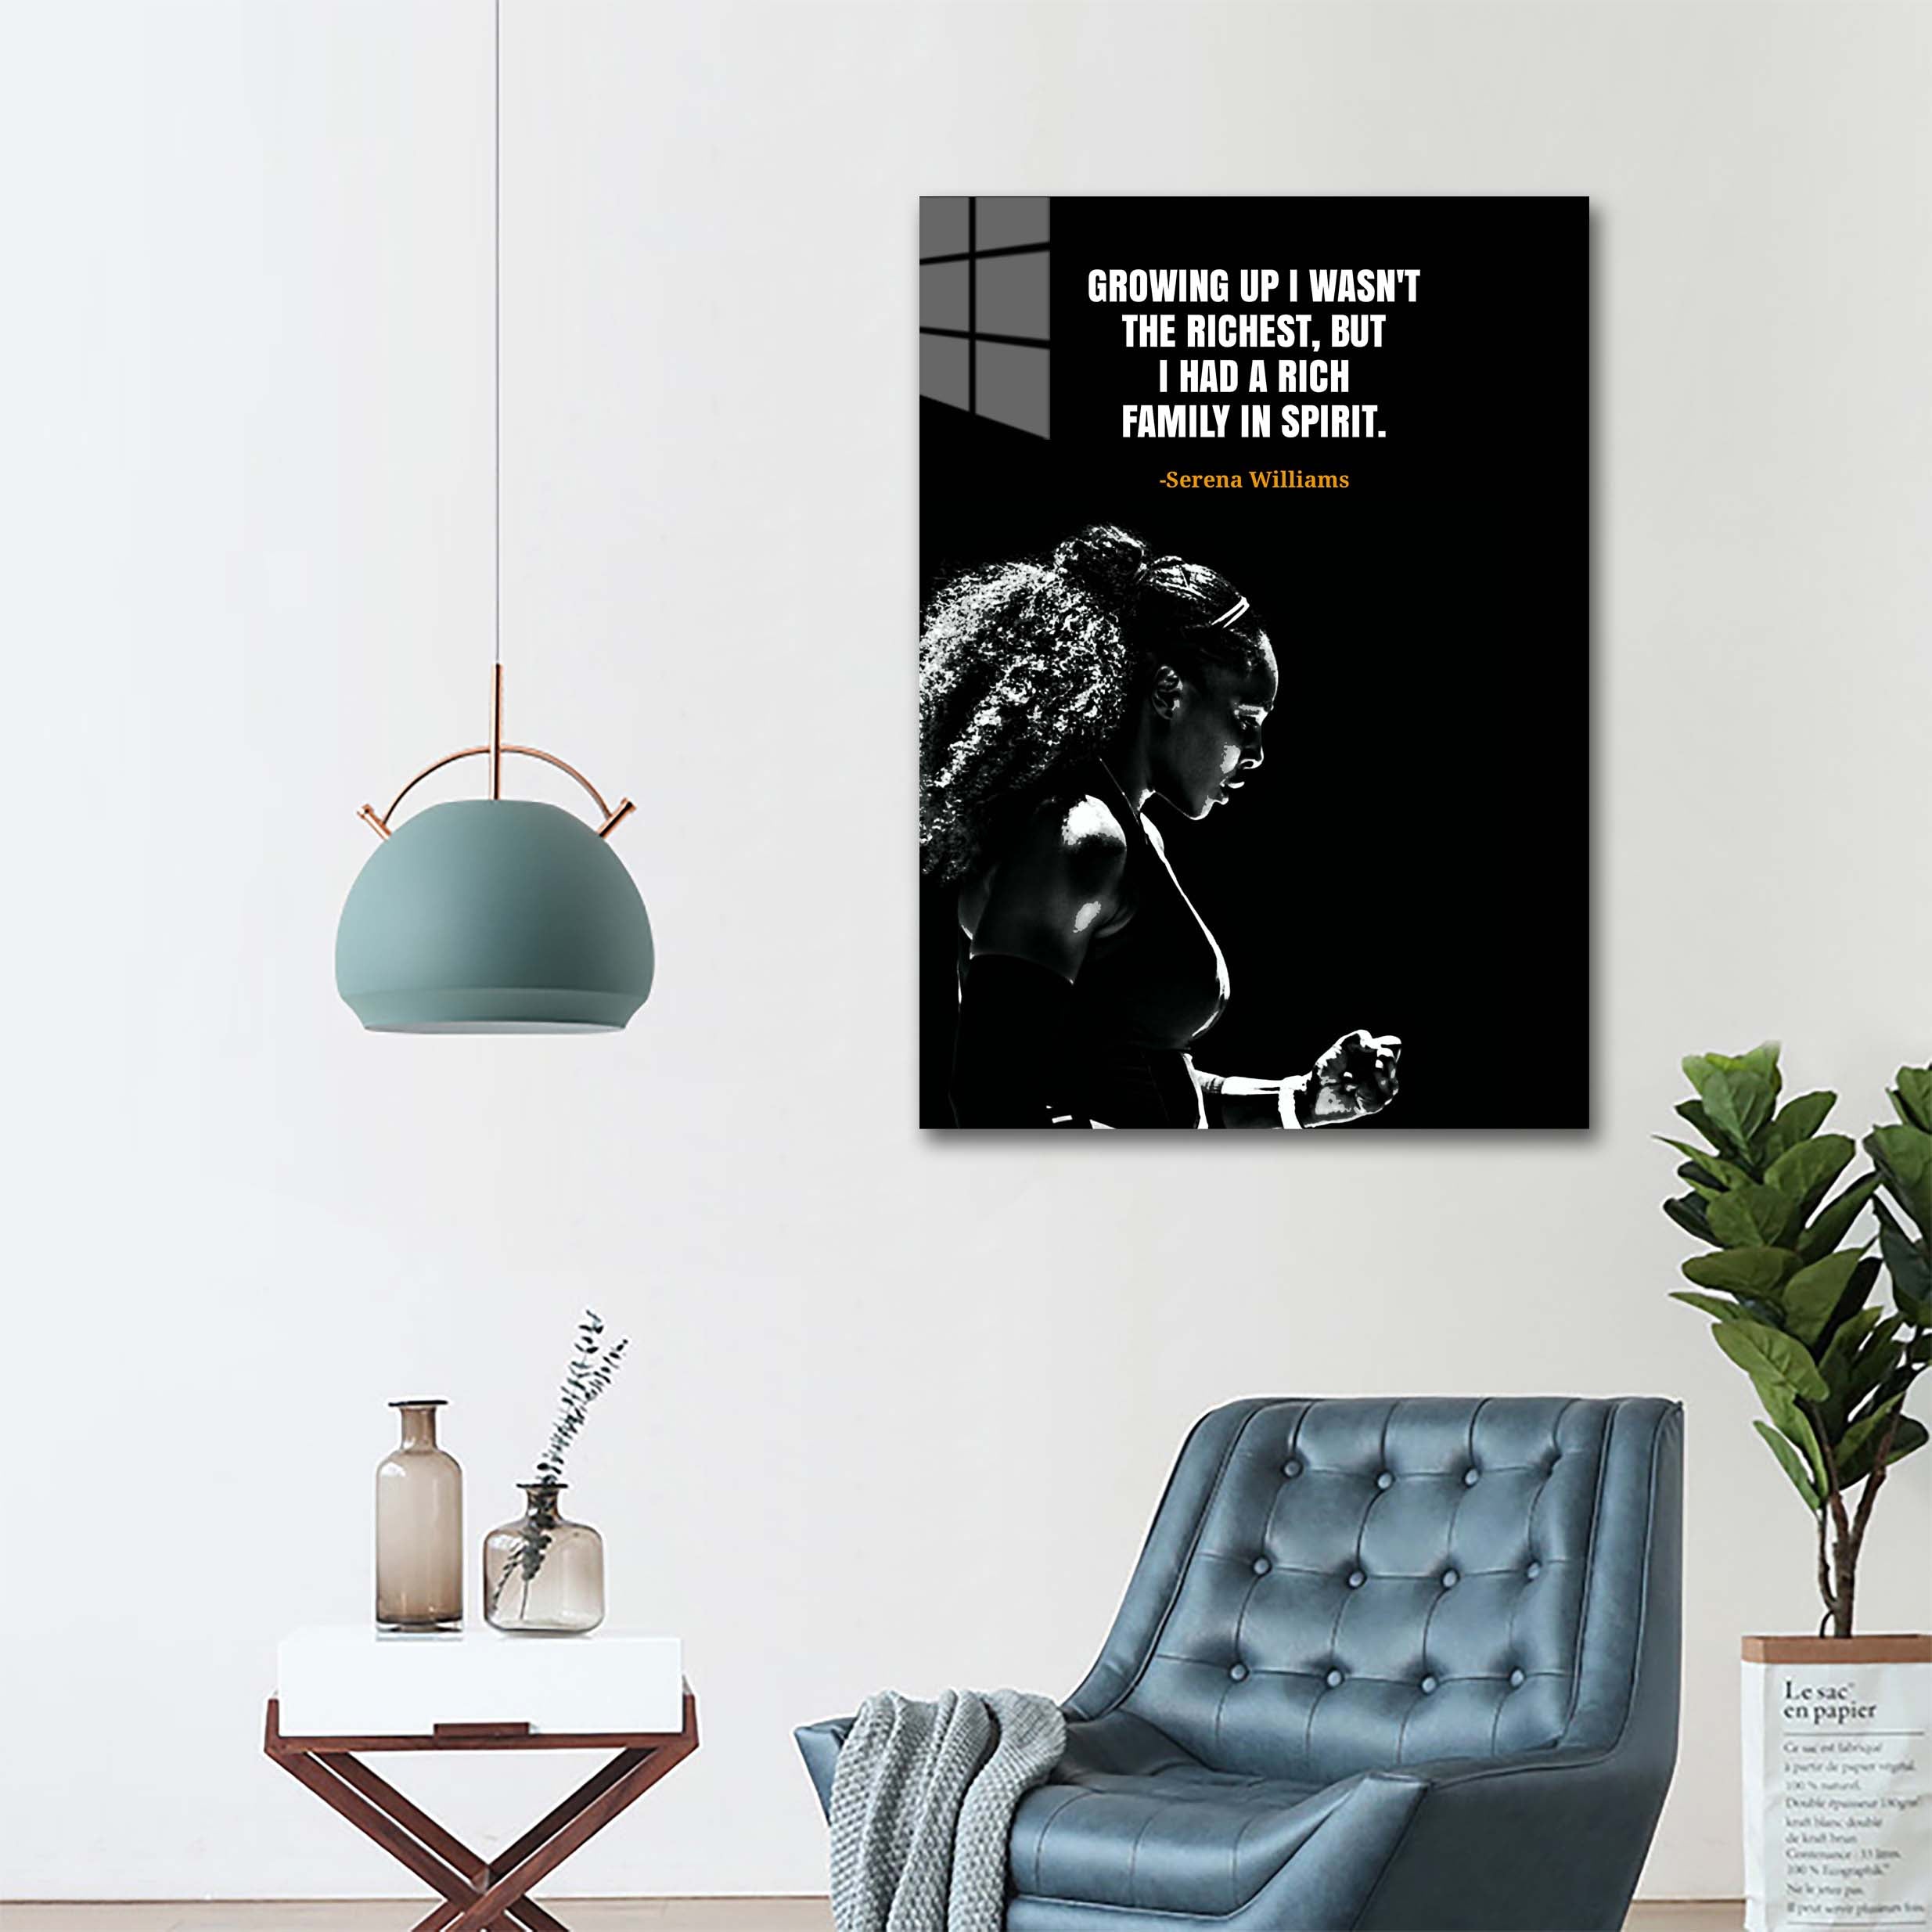 Serena Williams quote -designed by @Pus Meong art